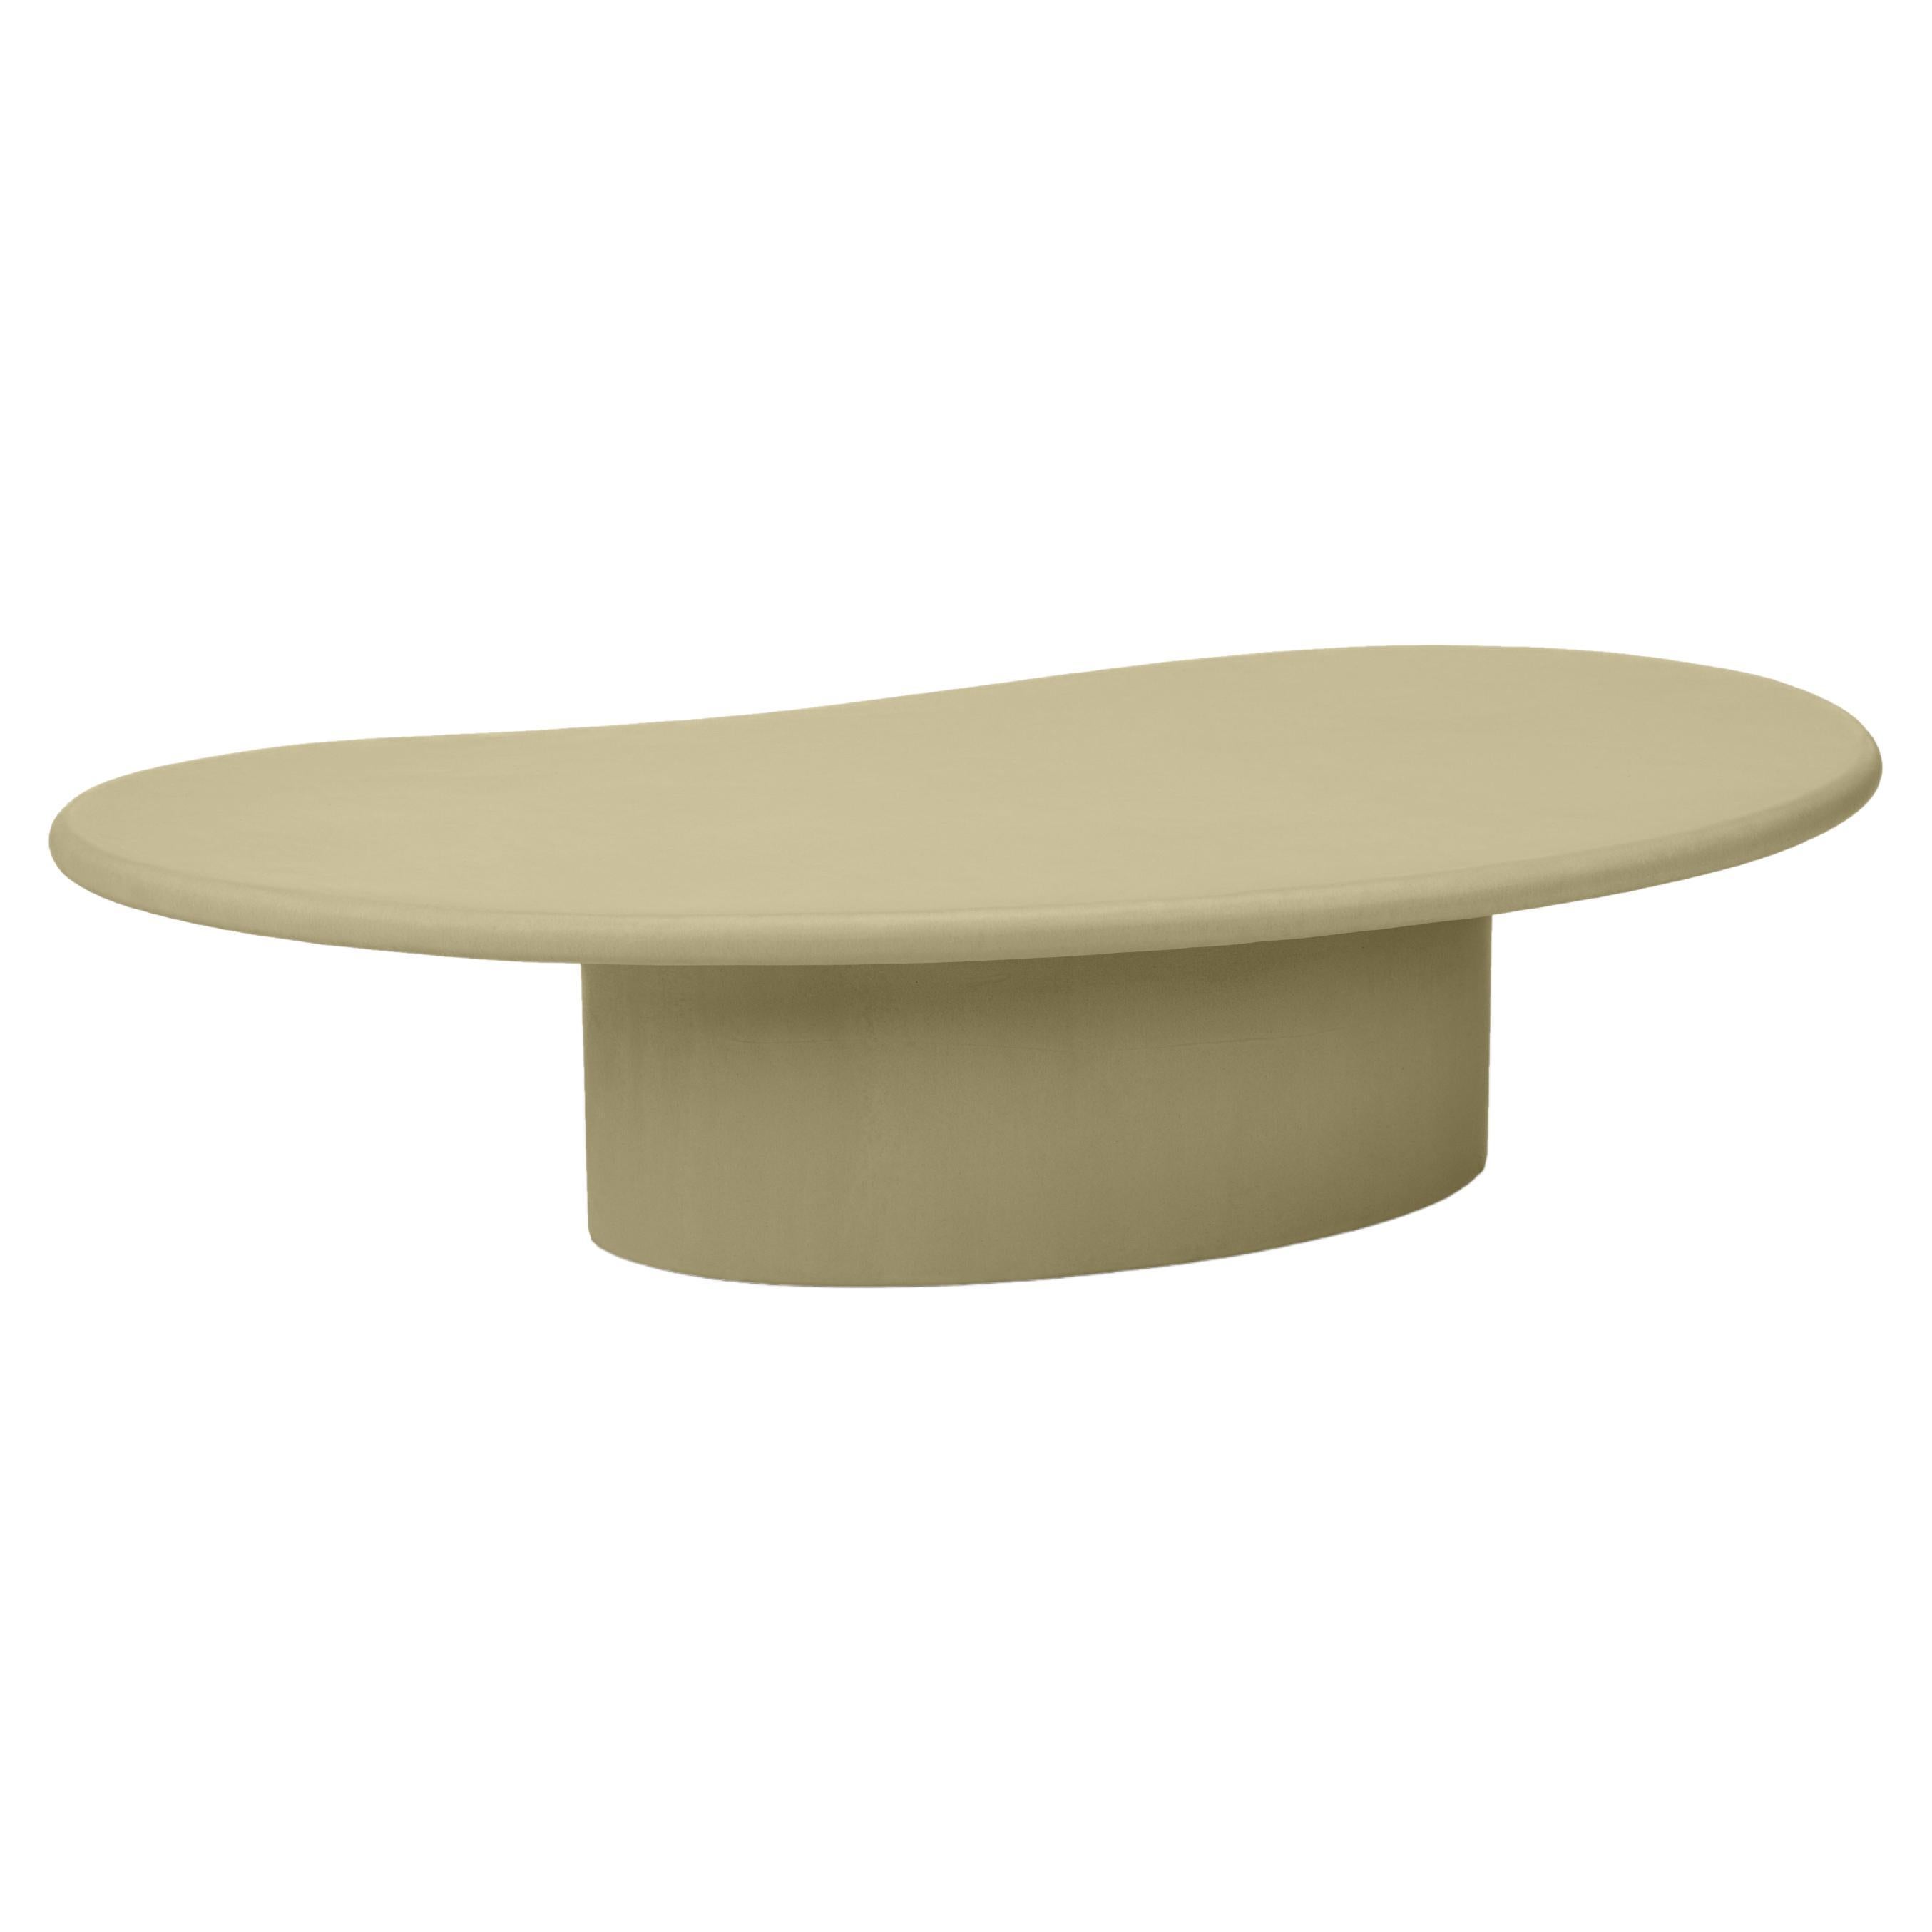 Organic Shaped Natural Plaster Coffee Table "Angus" 130 by Isabelle Beaumont